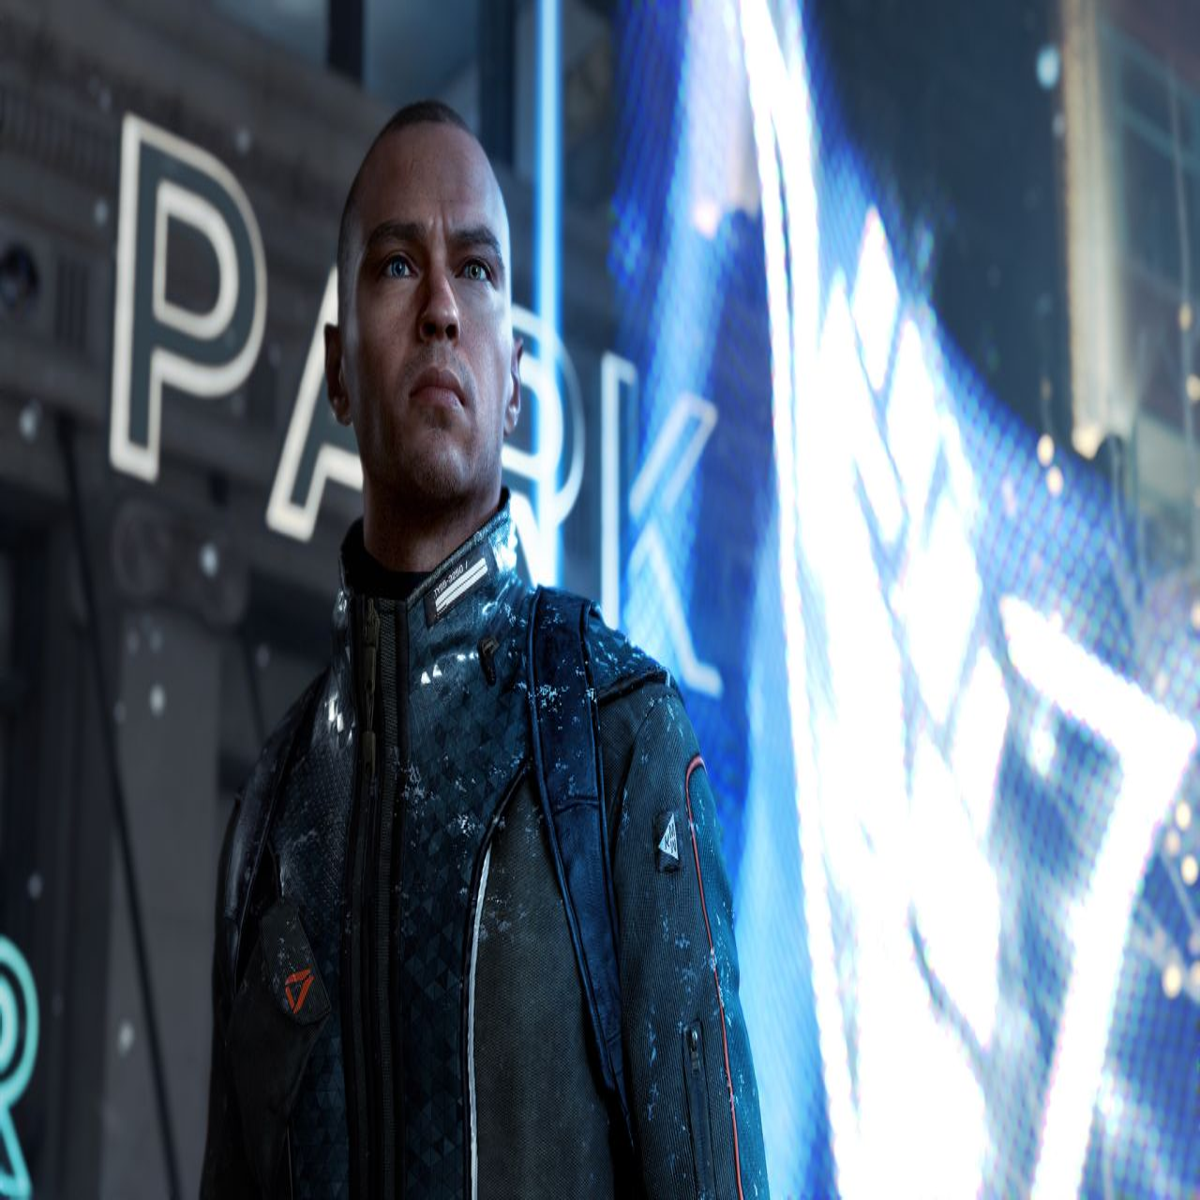 Just hear me out : r/DetroitBecomeHuman